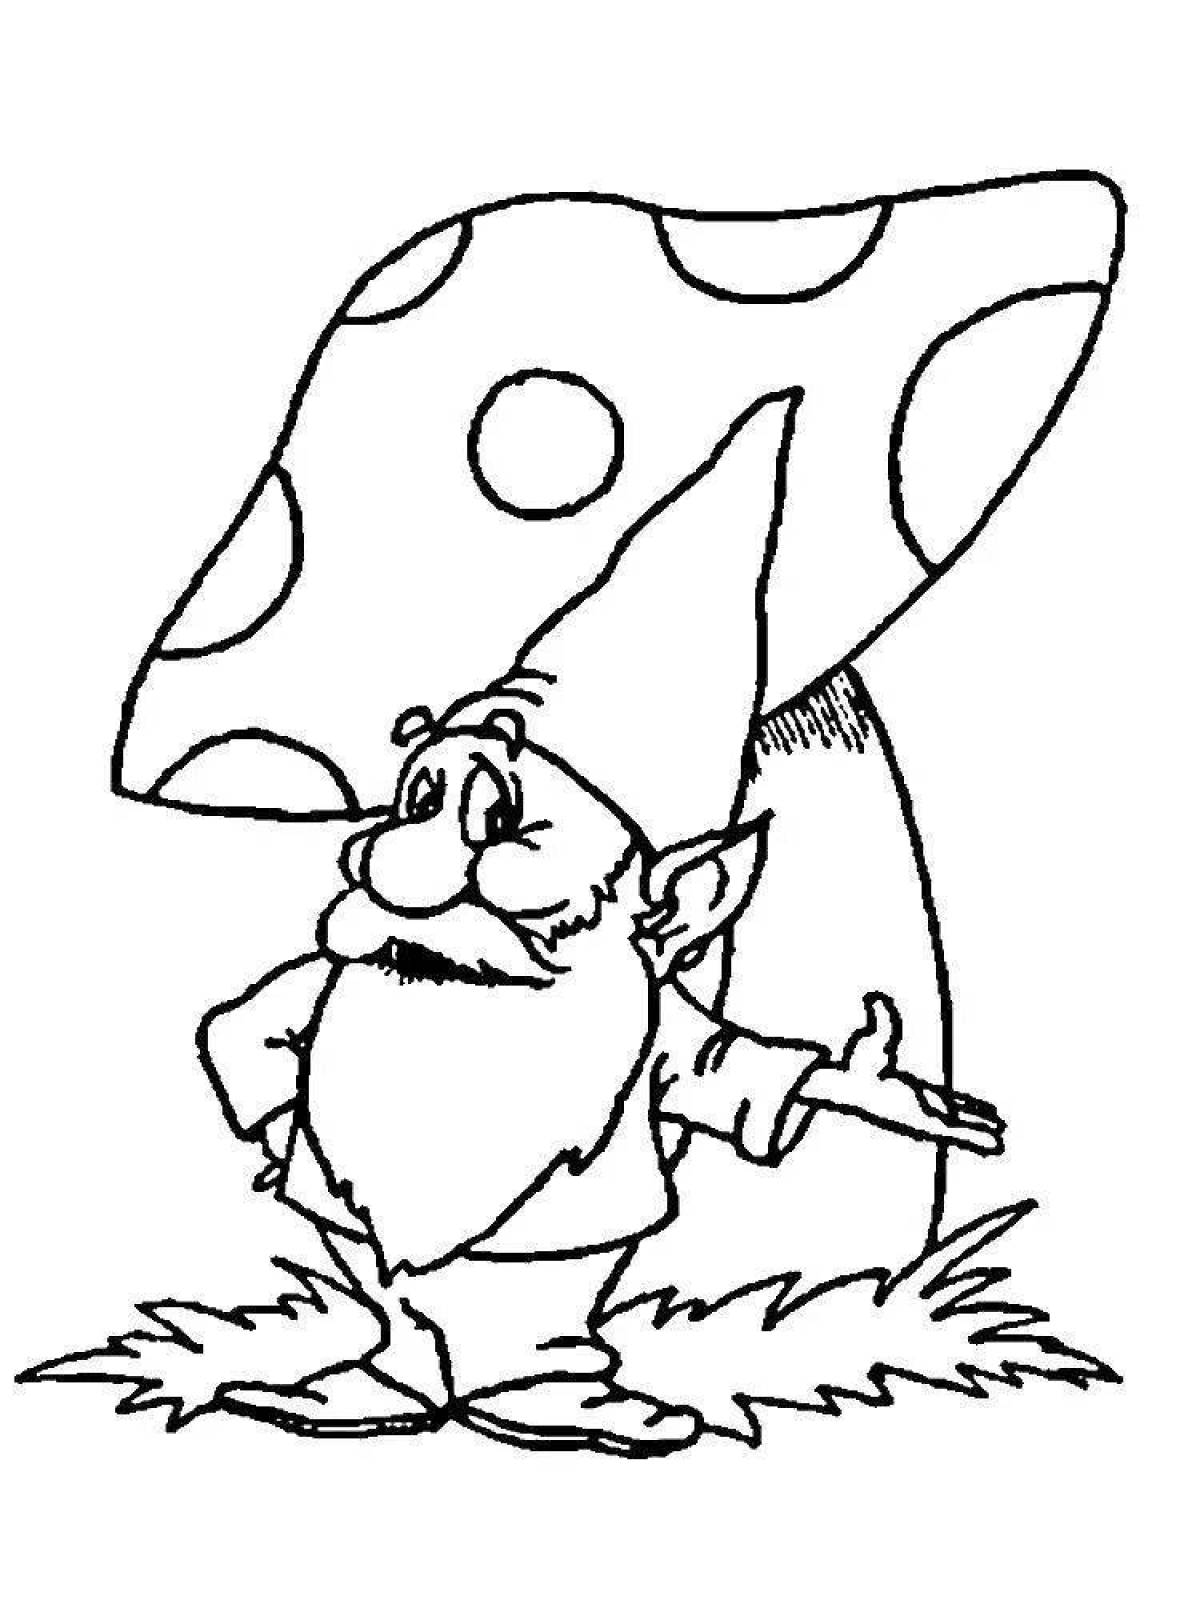 Bright dwarf coloring page